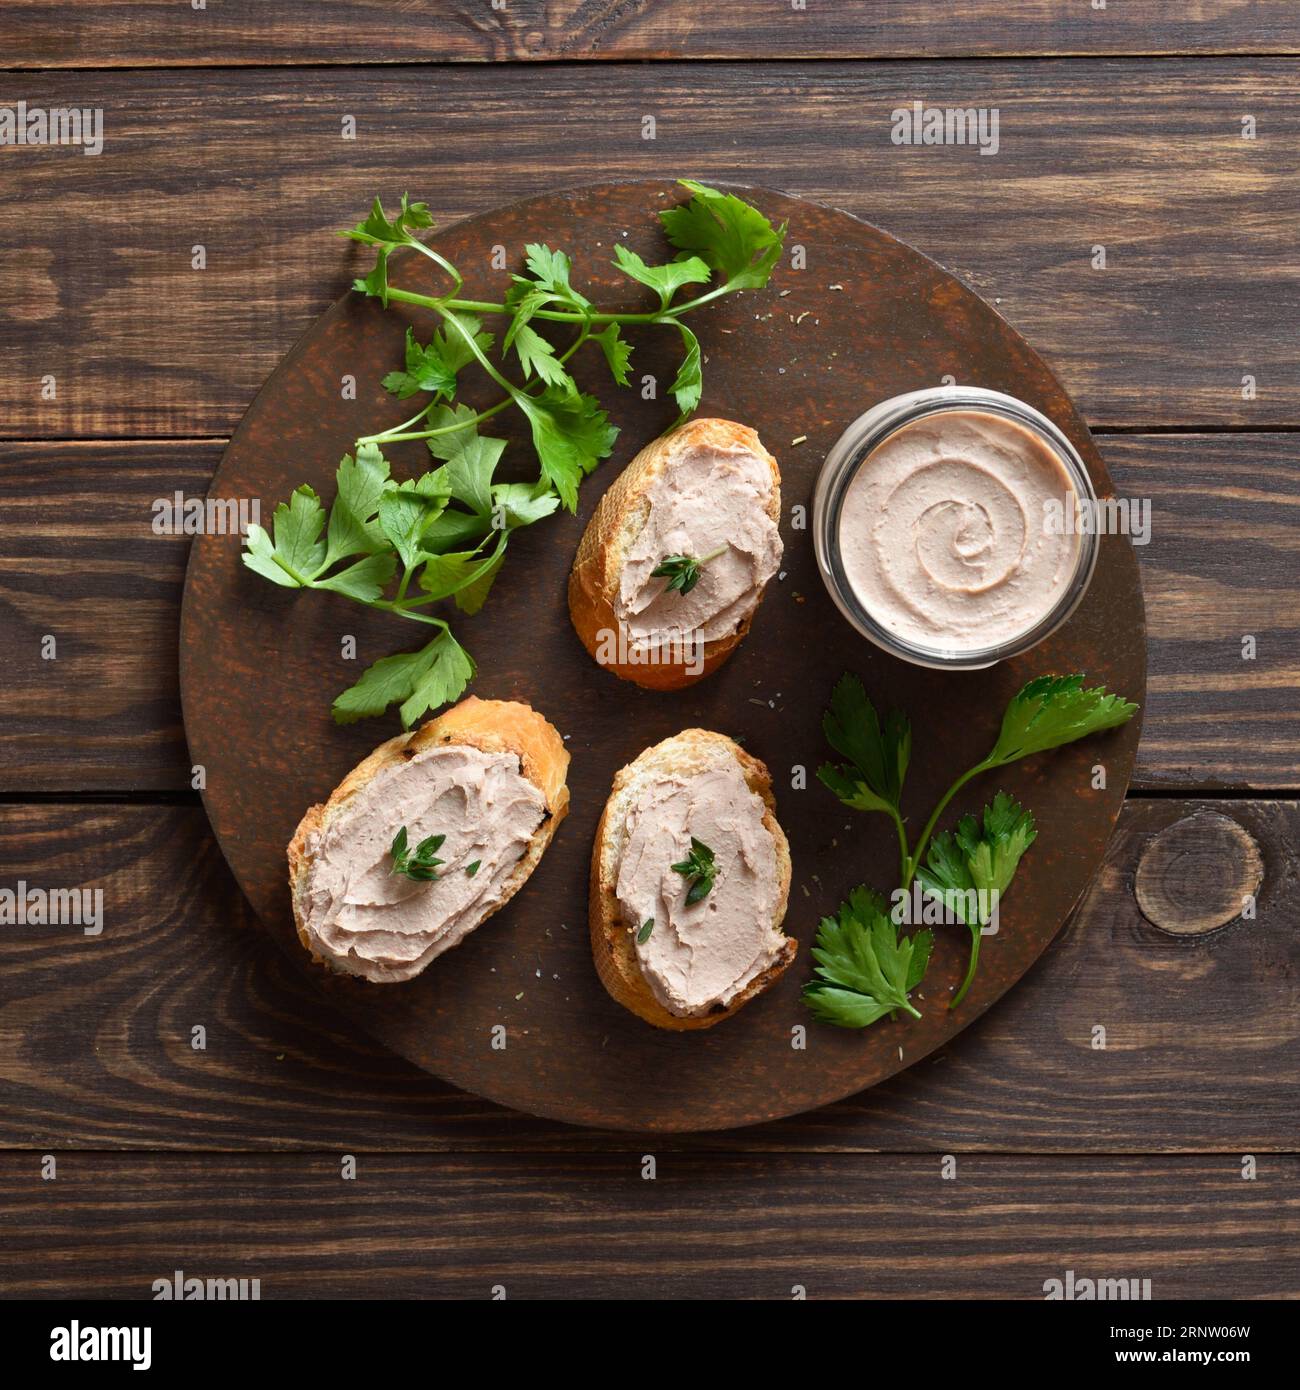 Toasted bread with chicken liver pate on cutting board over wooden background. Top view, flat lay Stock Photo